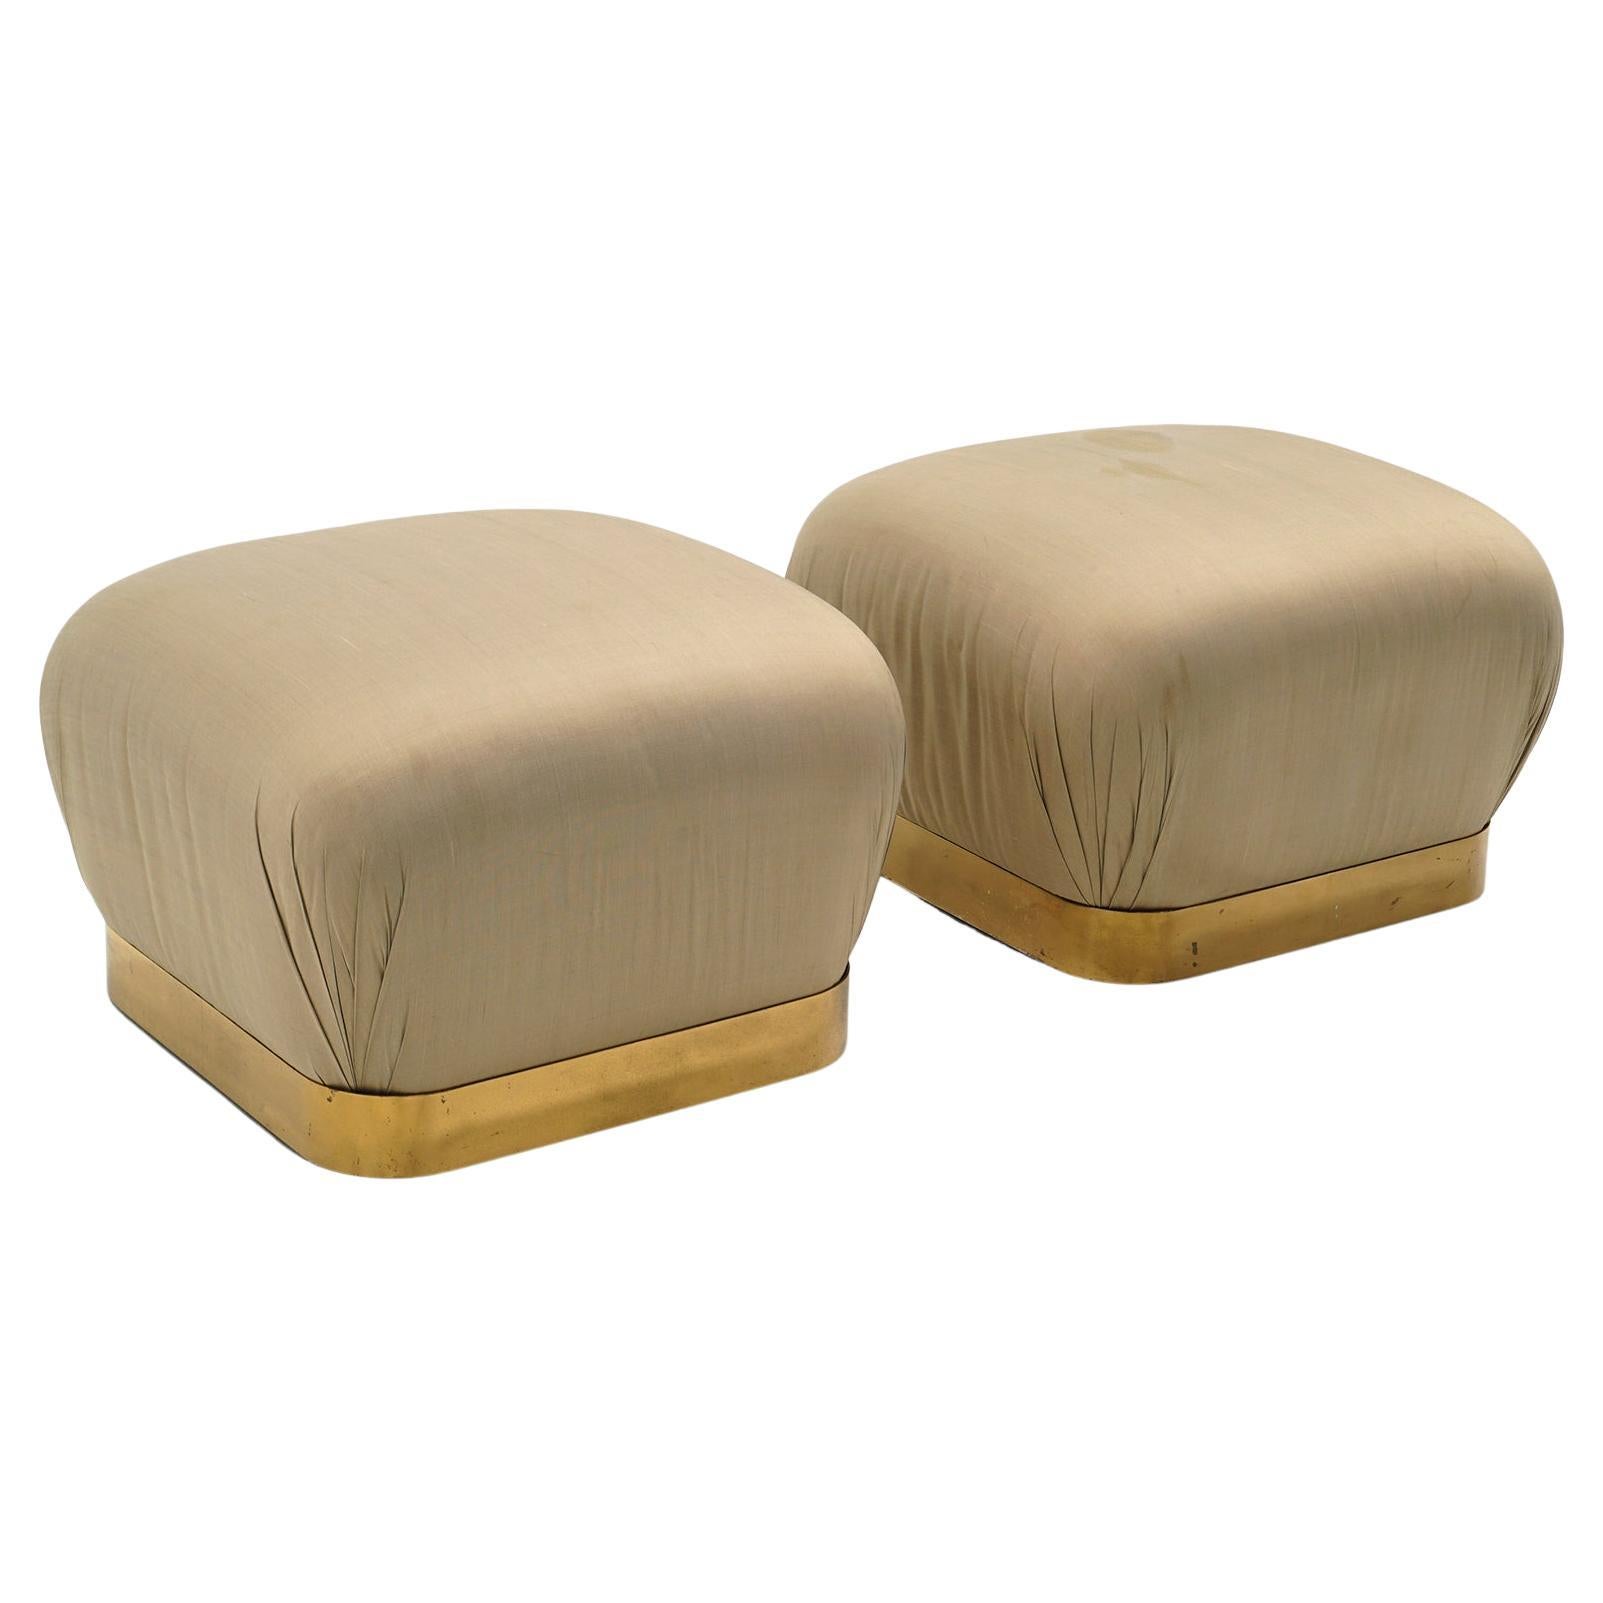 Pair of Poufs / Ottomans by Karl Springer, Original Tan / Taupe Fabric, Brass